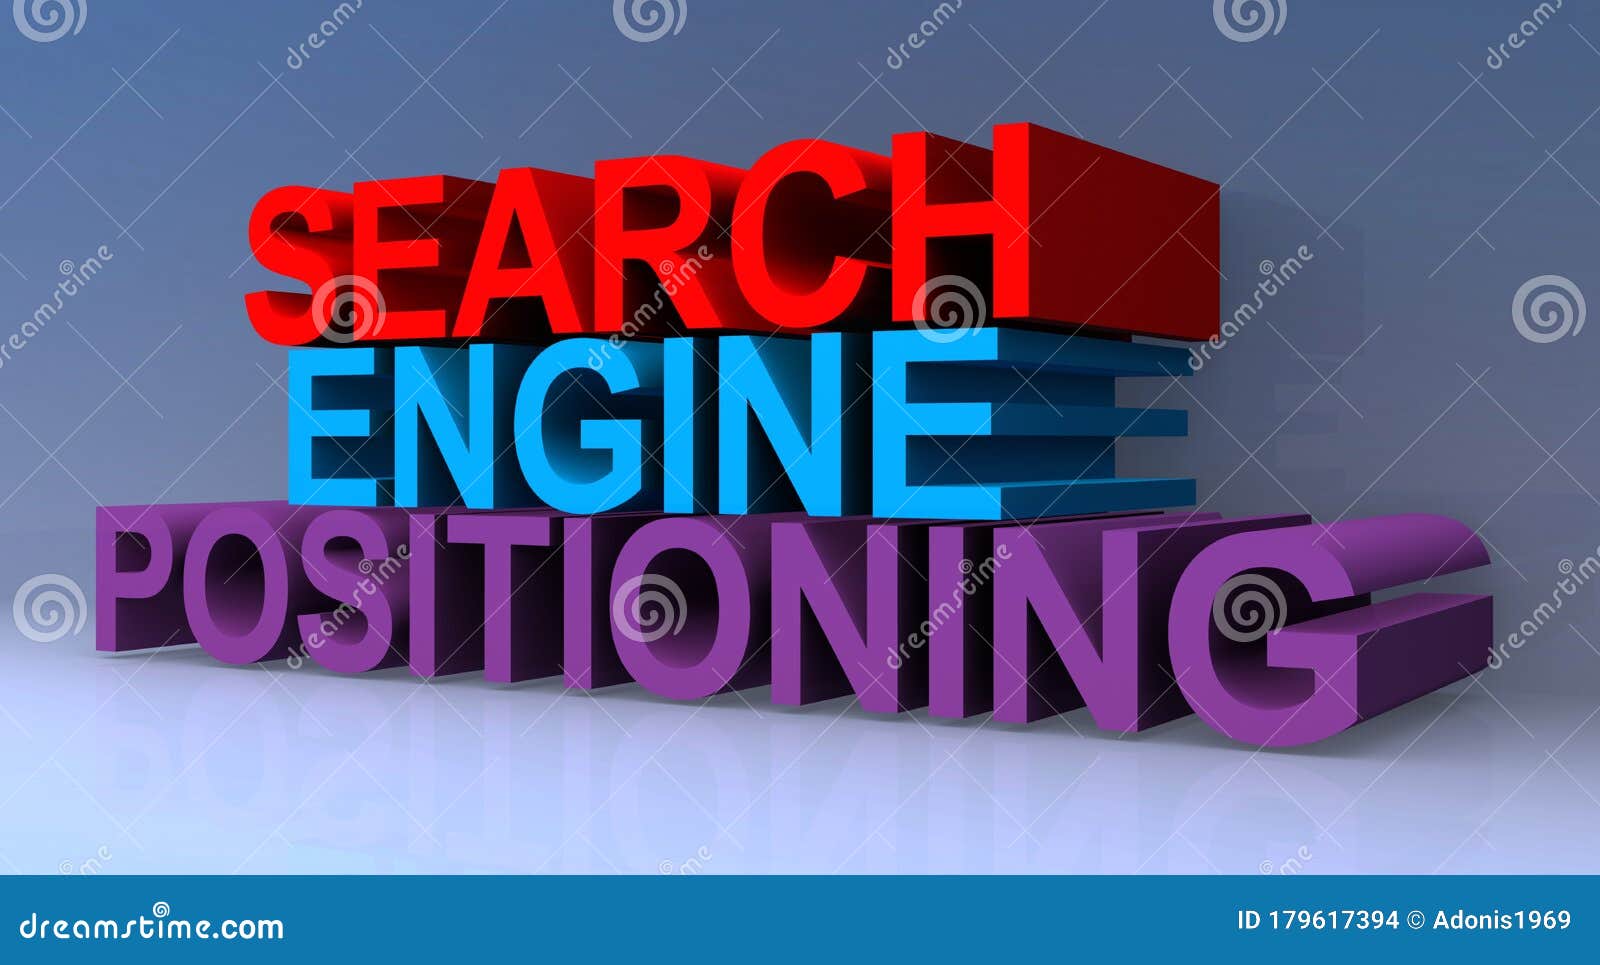 search engine positioning